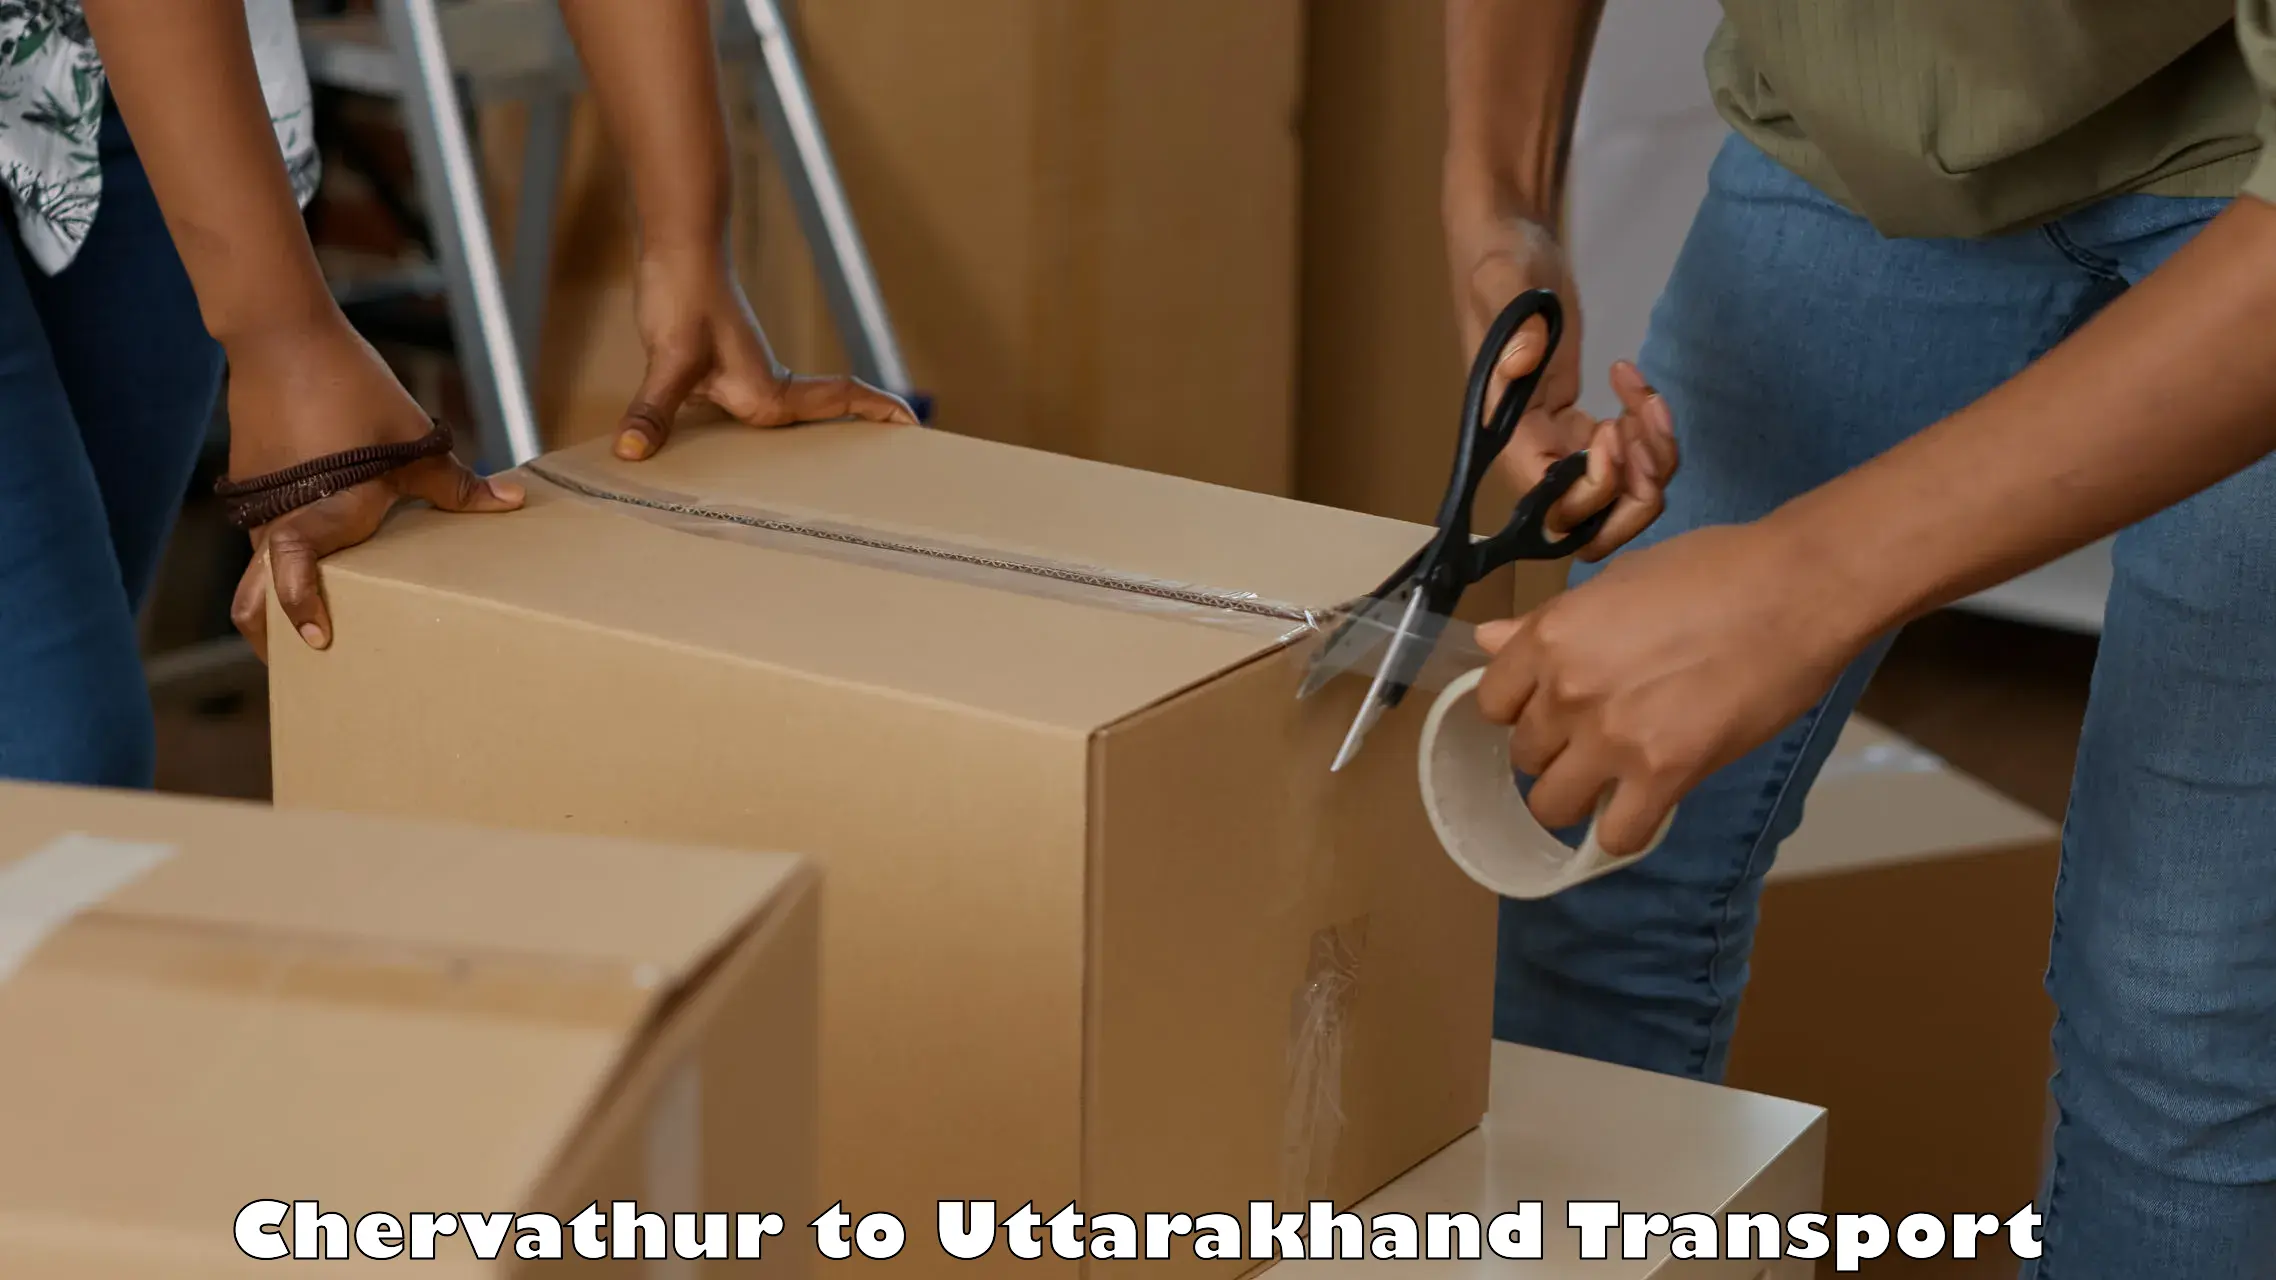 Truck transport companies in India Chervathur to Pithoragarh